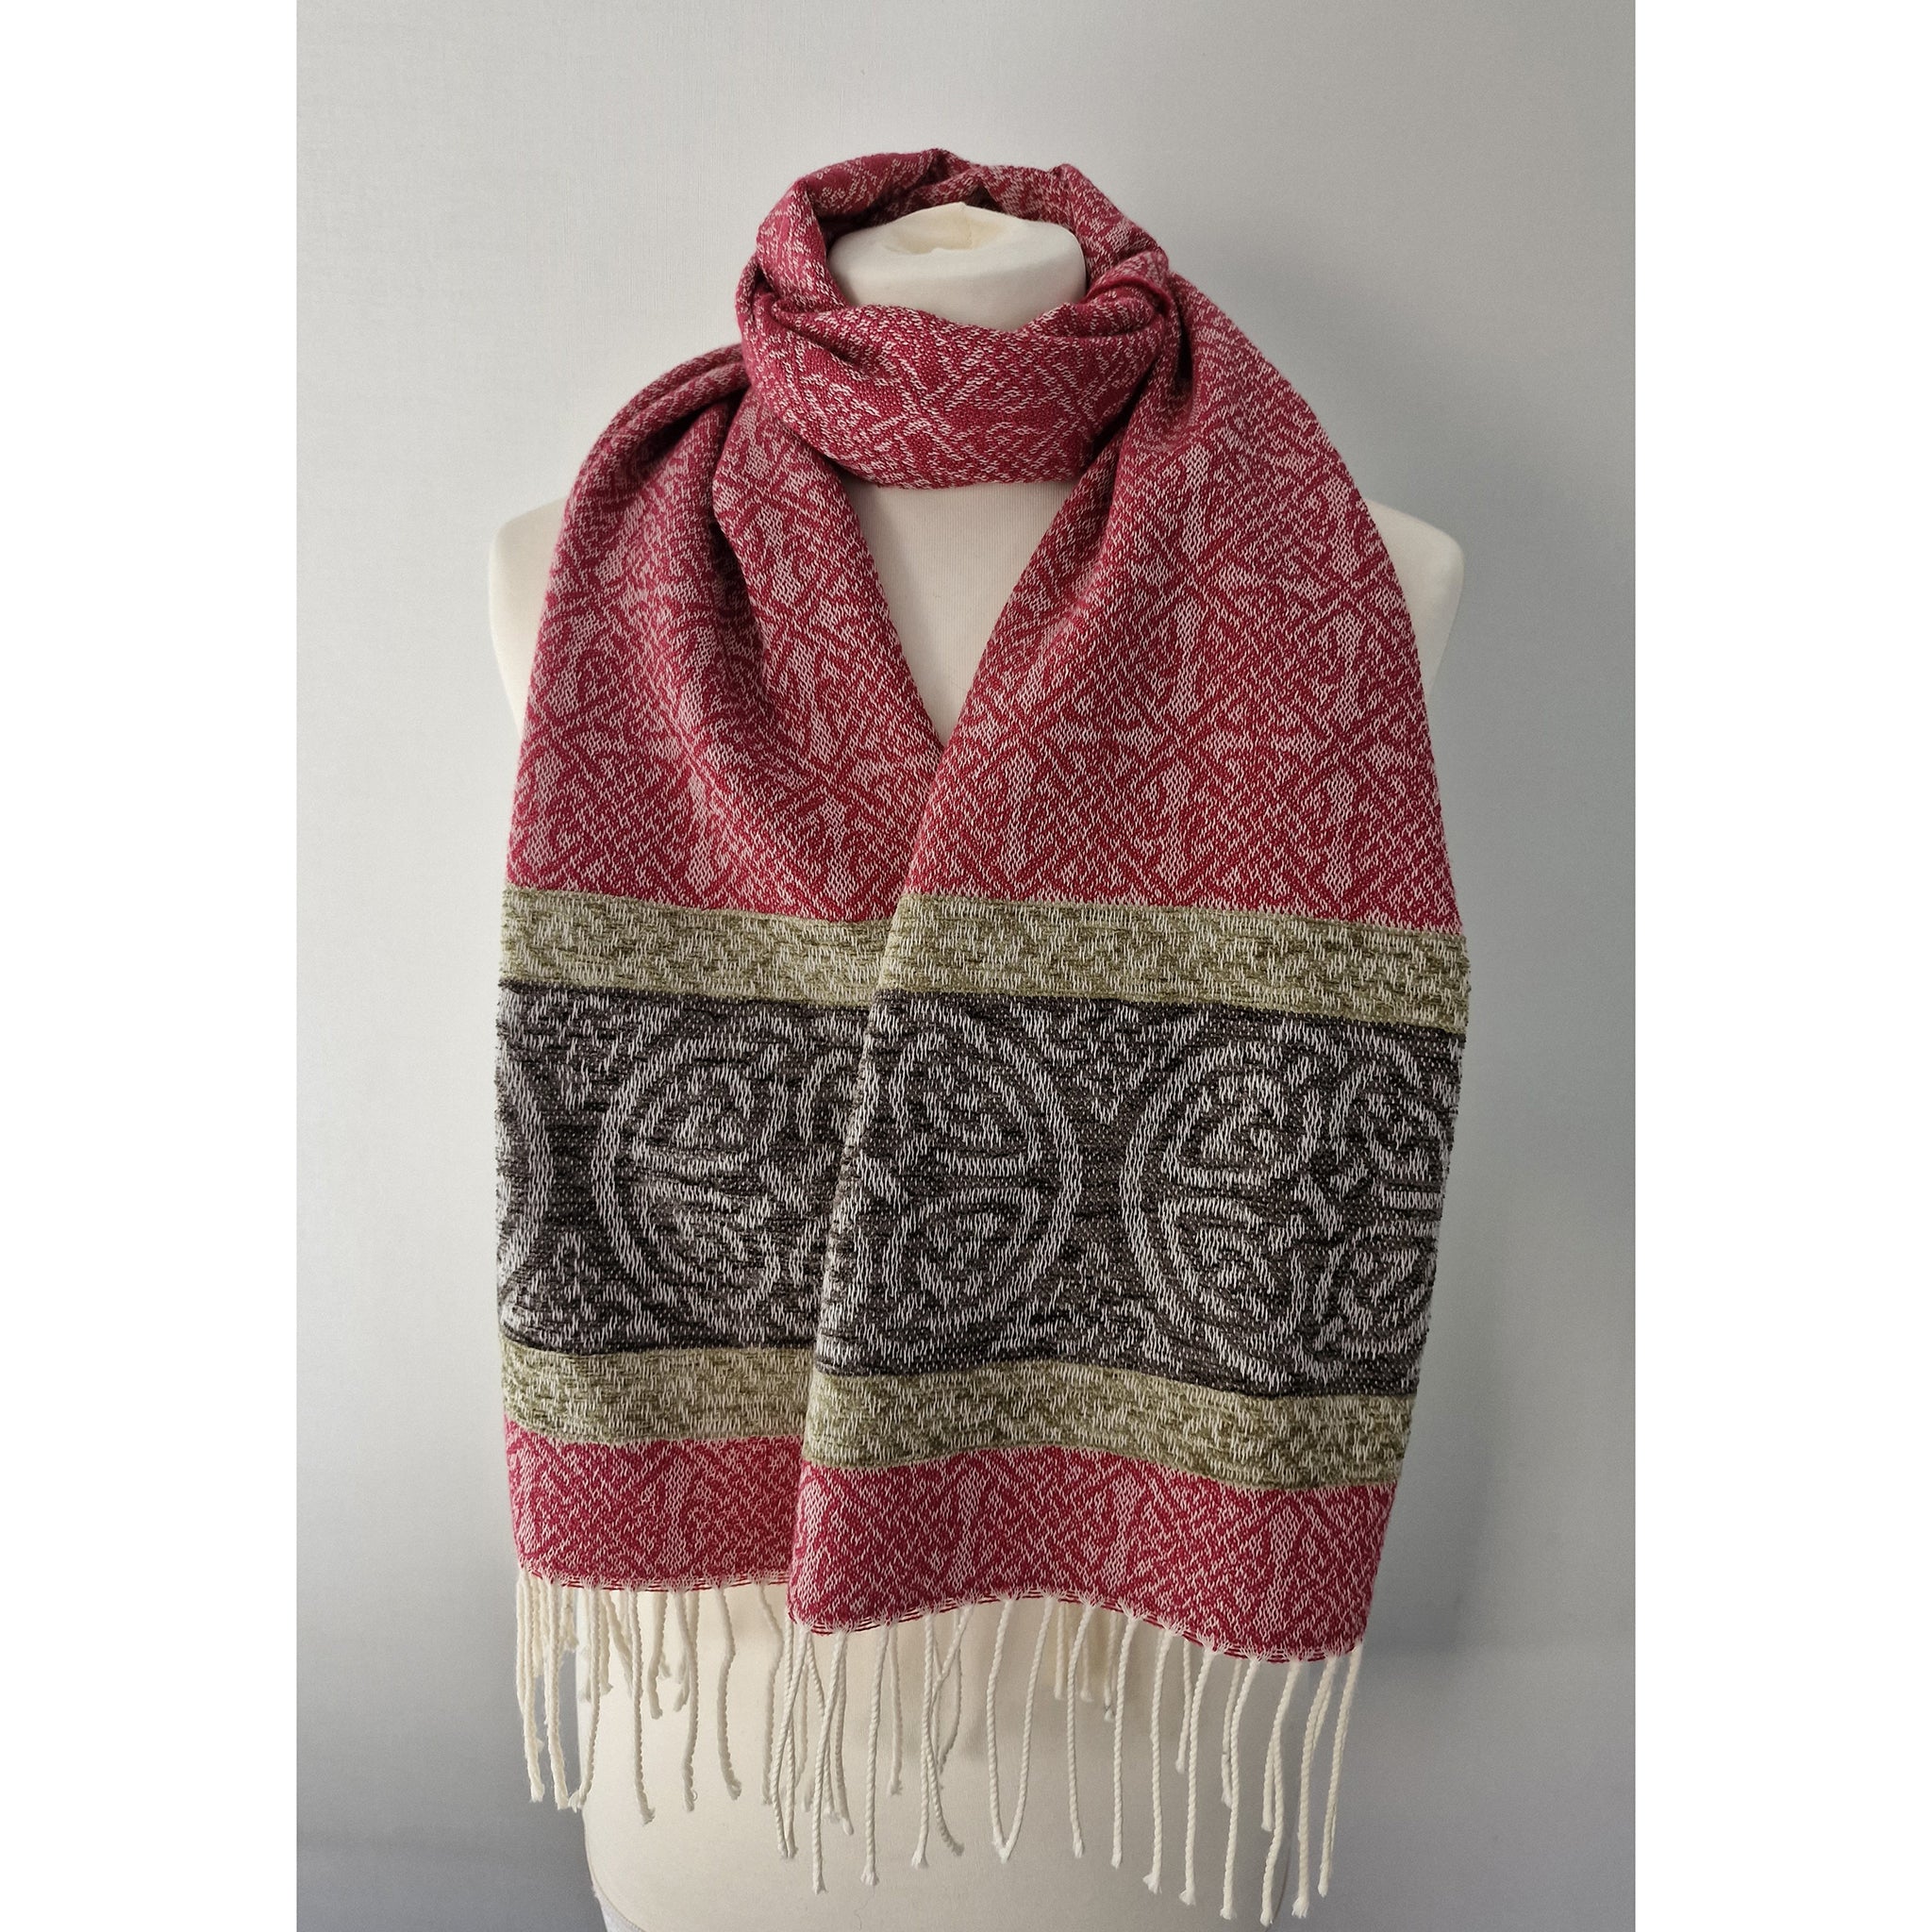 A pink scarf featuring a border of Celtic knots and a tassel trim